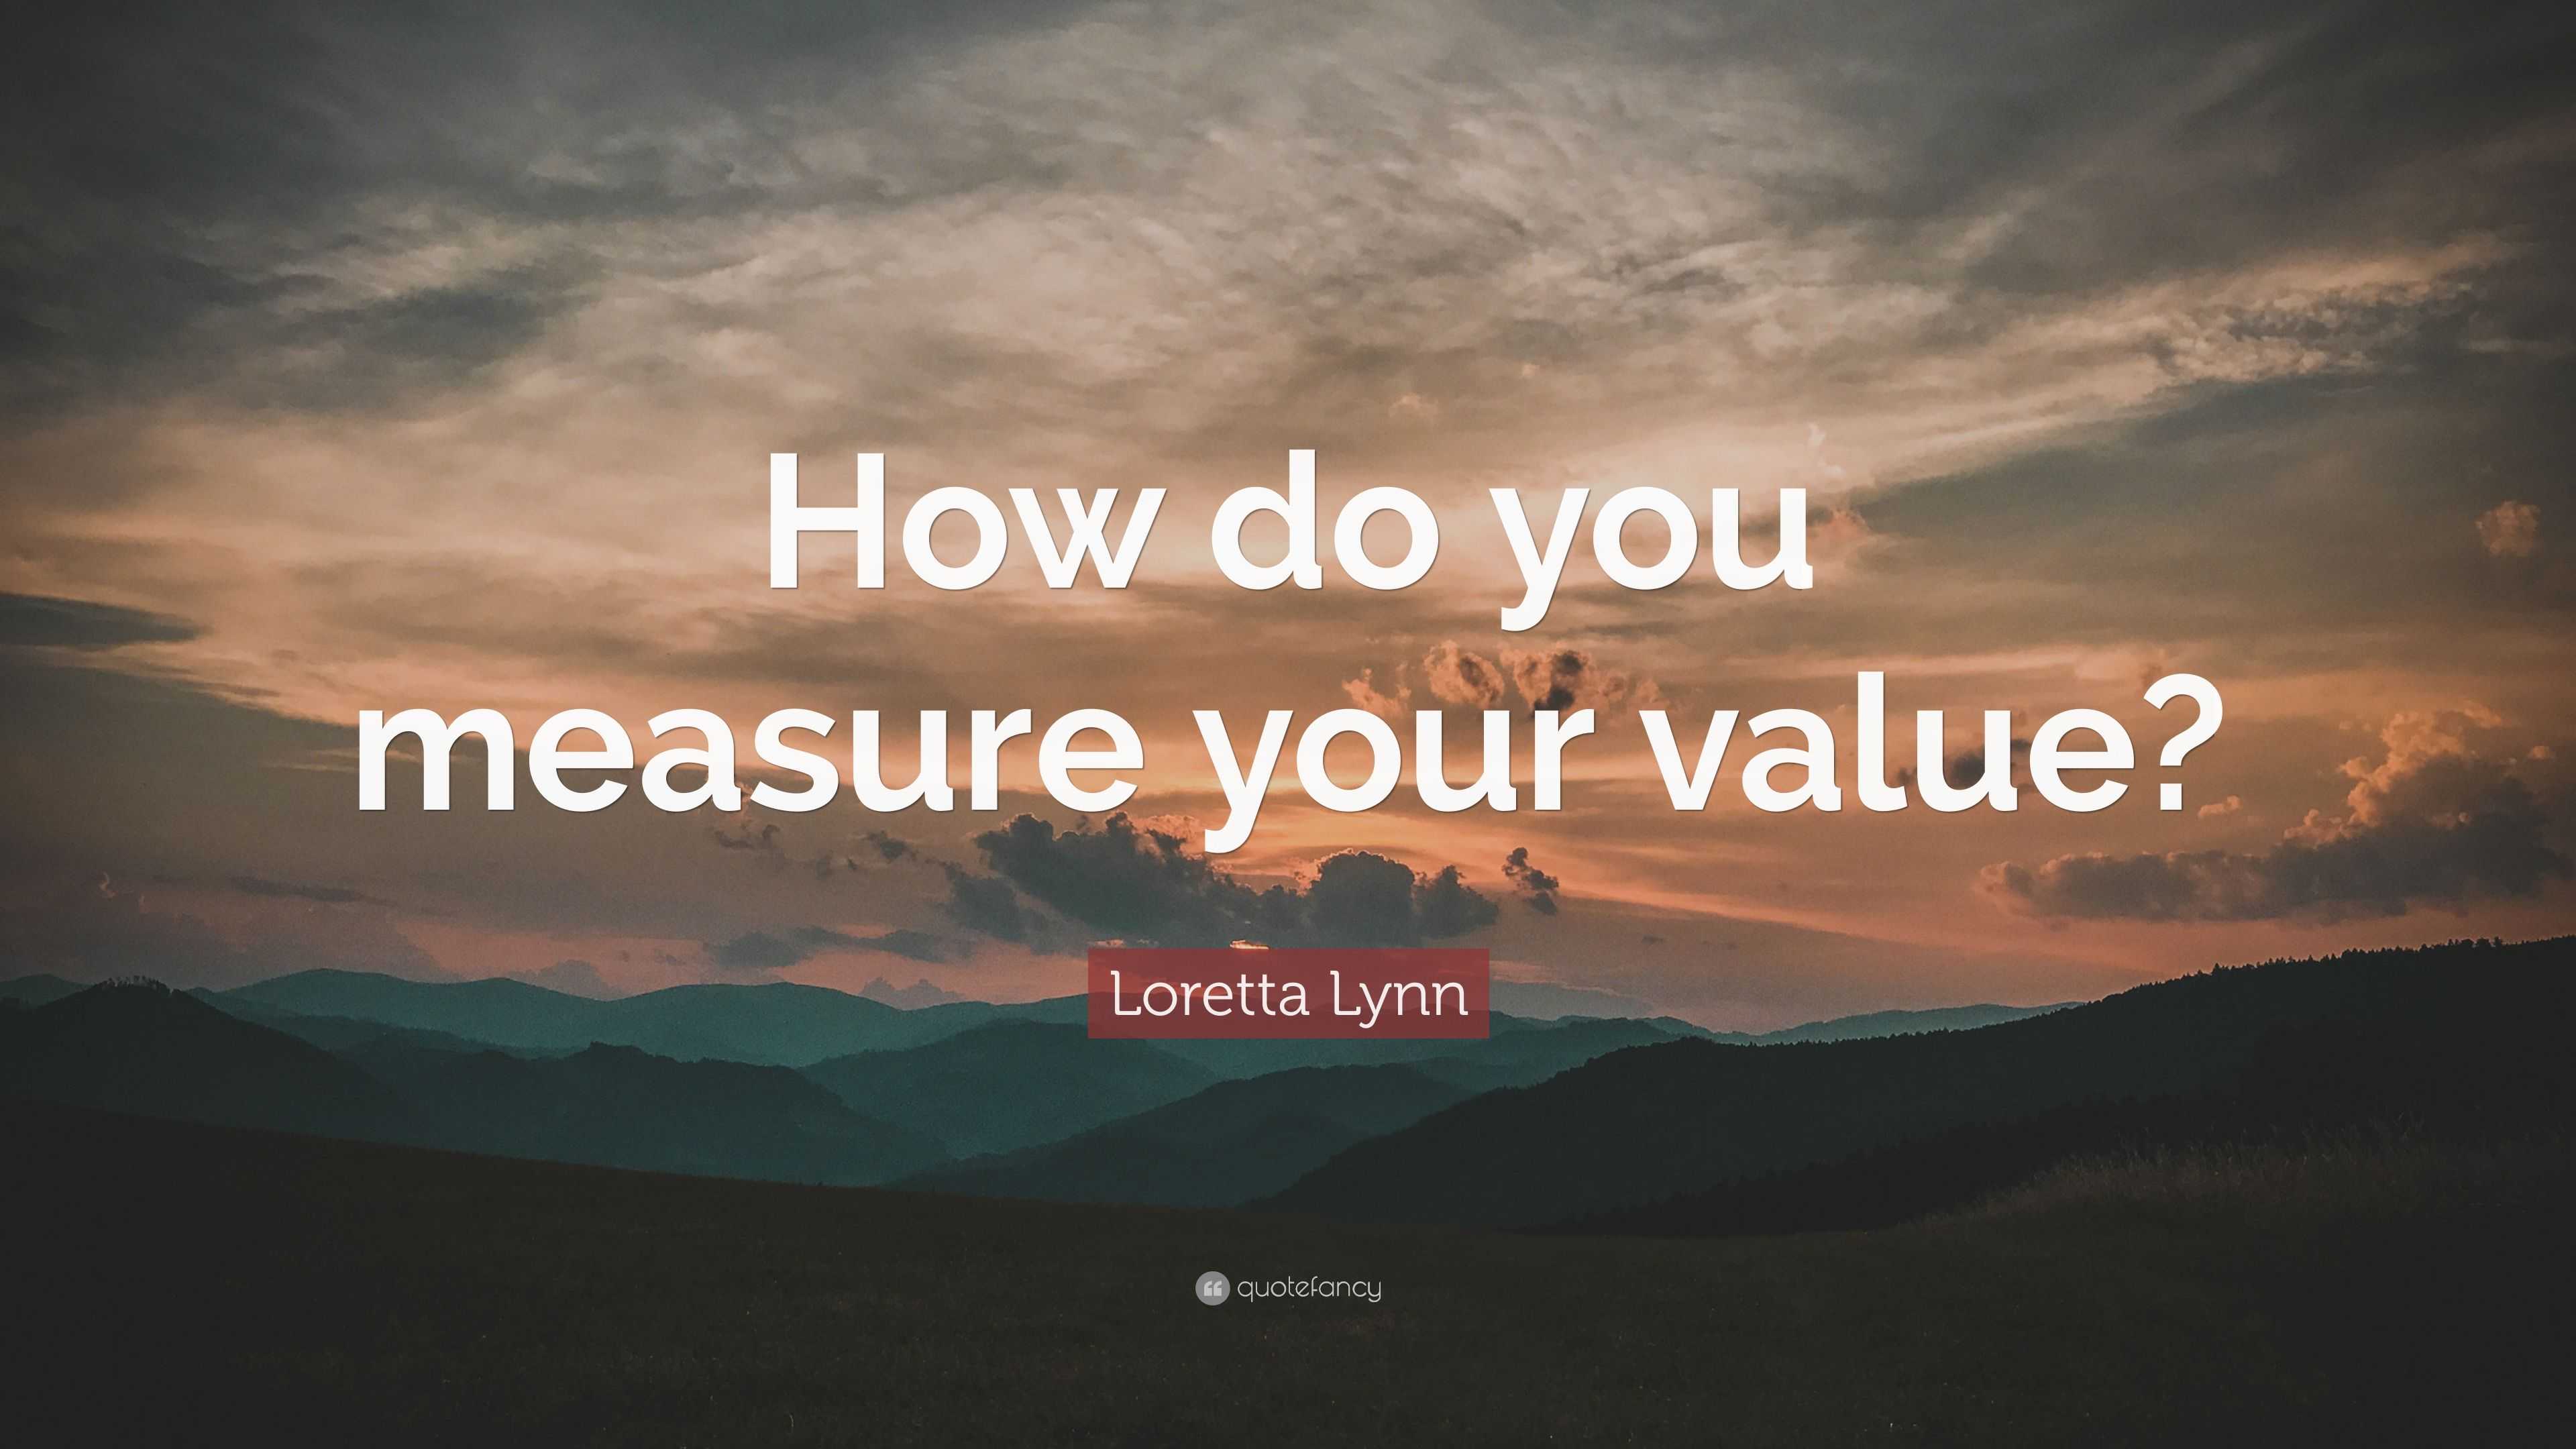 Loretta Lynn Quote “how Do You Measure Your Value”